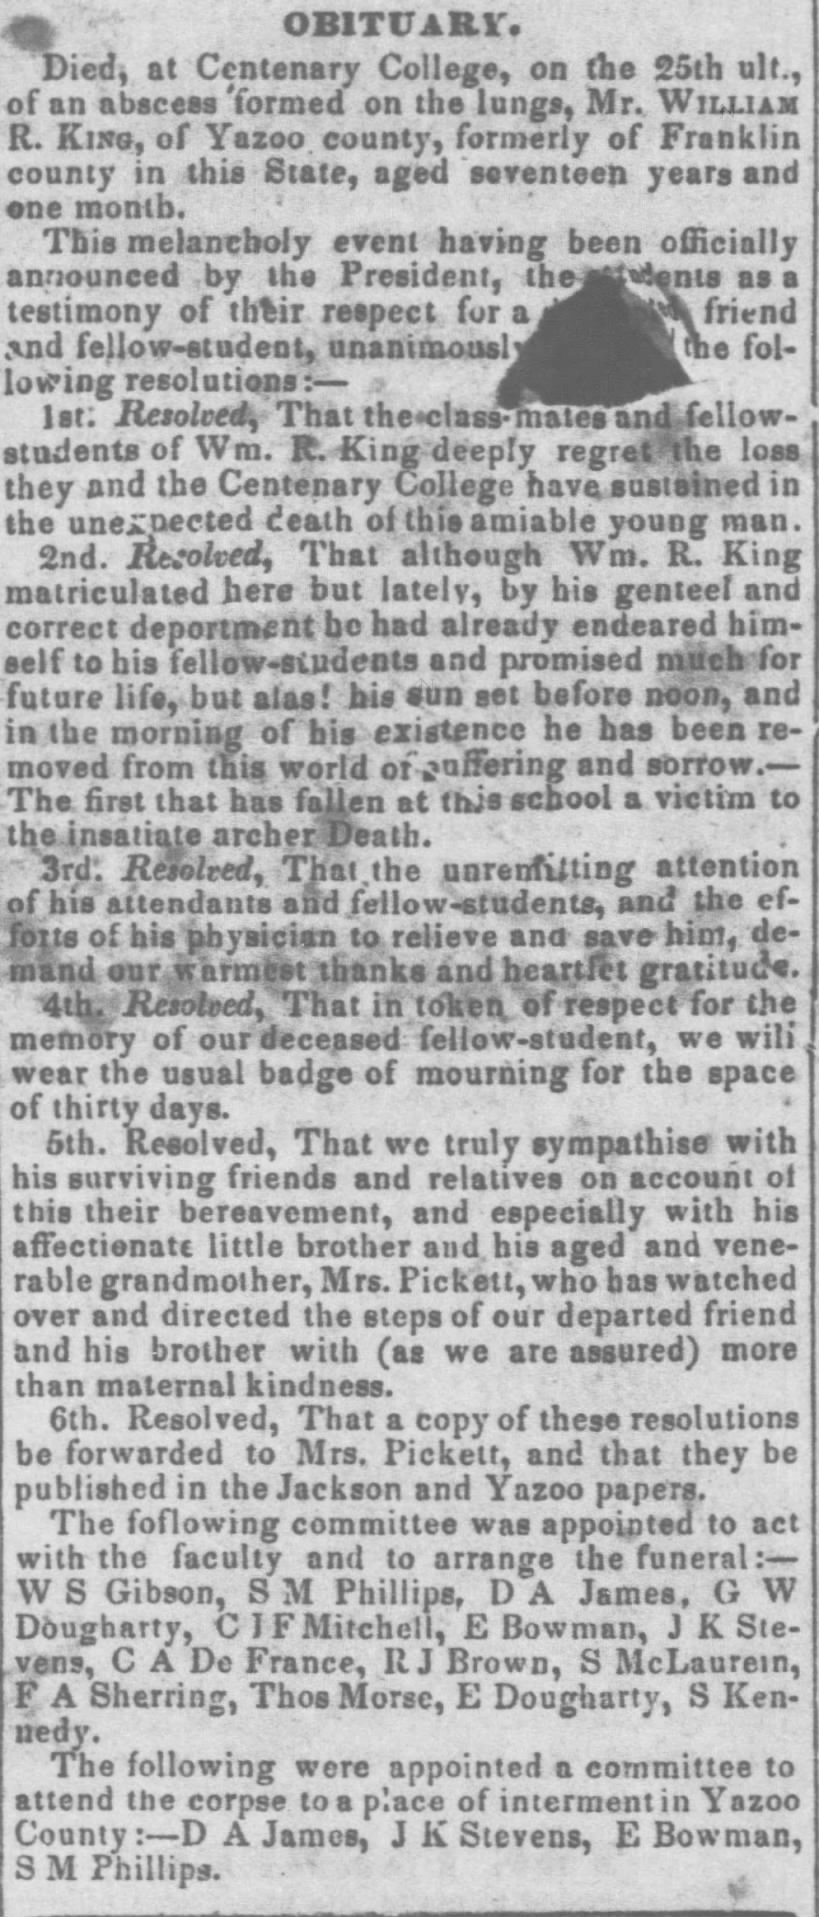 1843 William R King, grandson of Mrs. Pickett, died while a student at Centenary College.